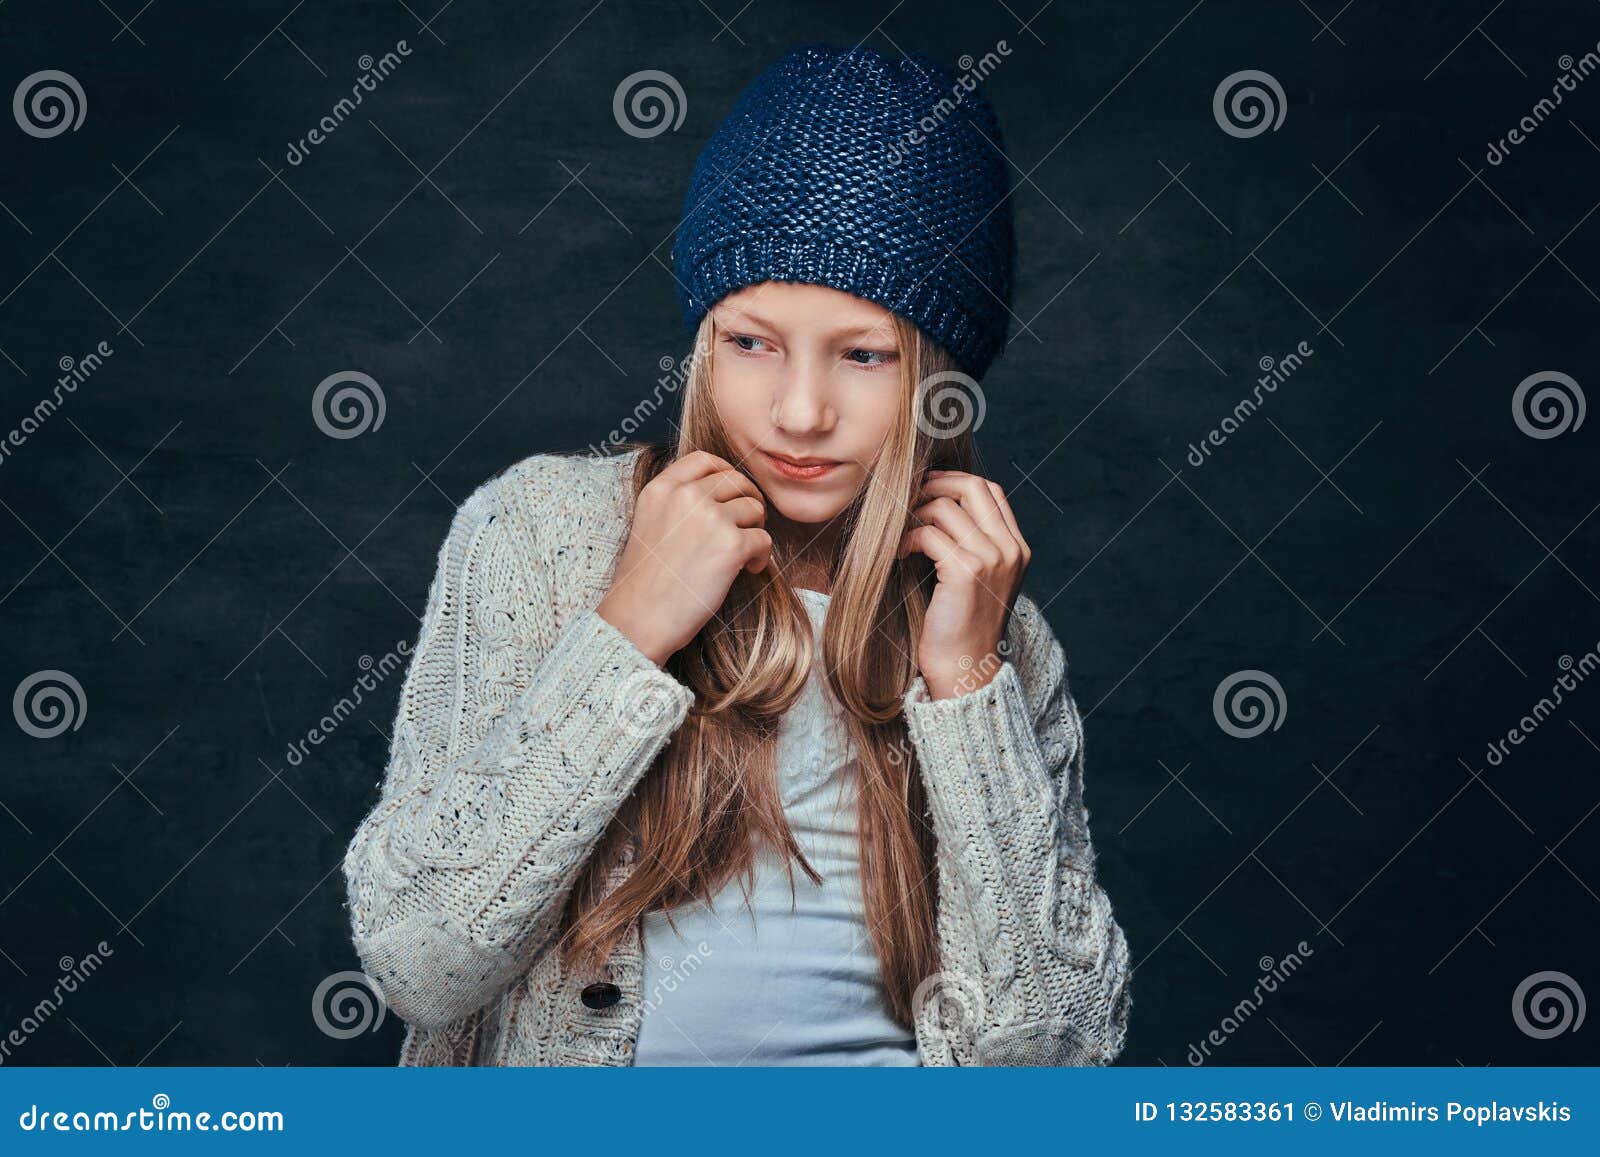 Portrait of a Teen Girl with Blonde Hair Wearing a Winter Hat and ...